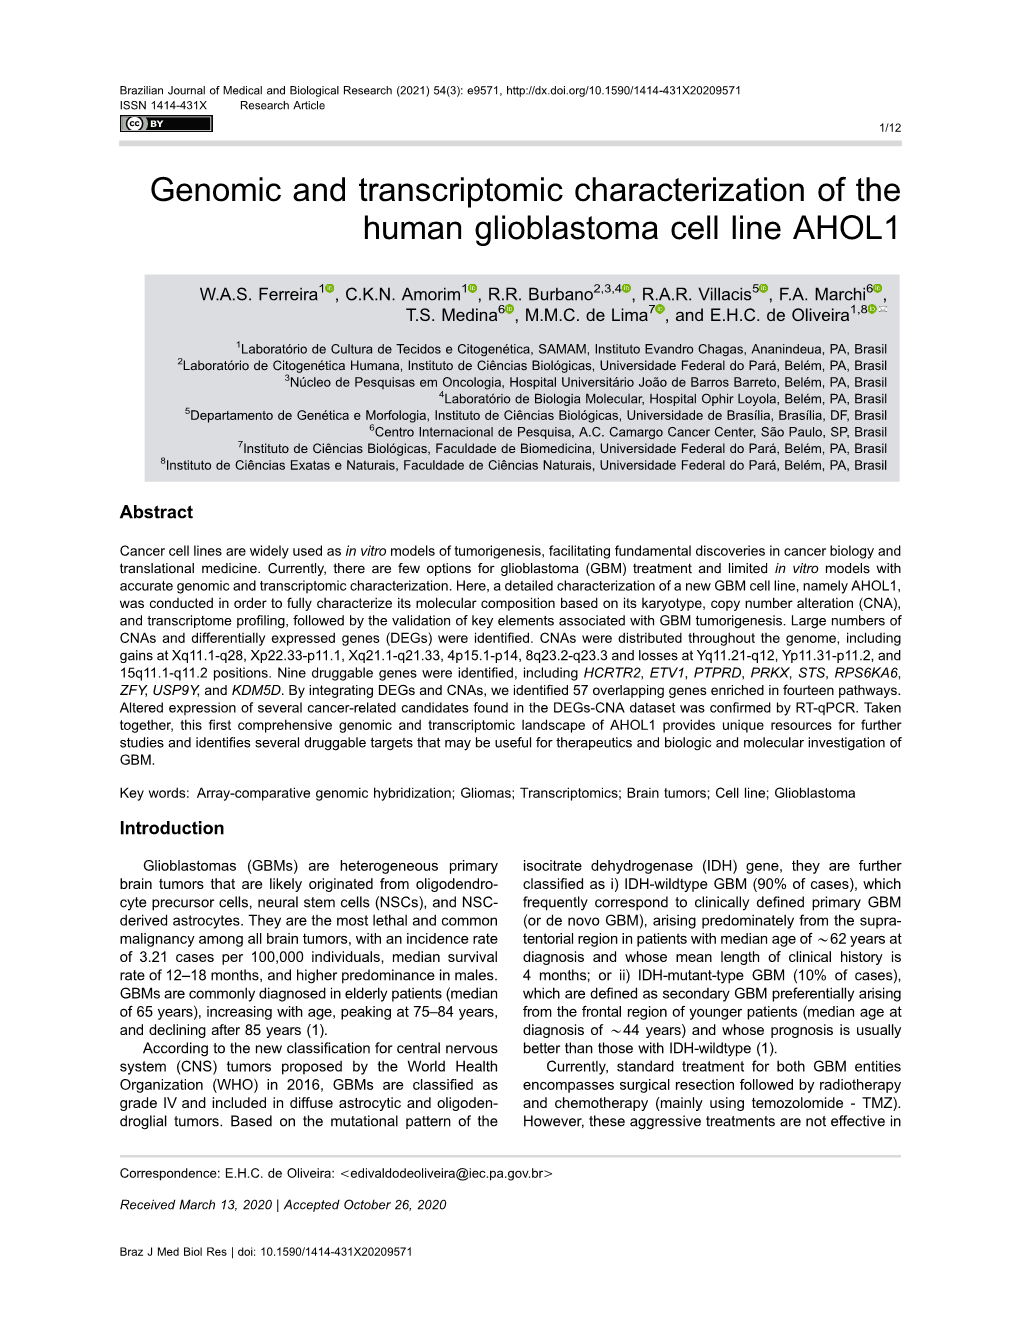 Genomic and Transcriptomic Characterization of the Human Glioblastoma Cell Line AHOL1